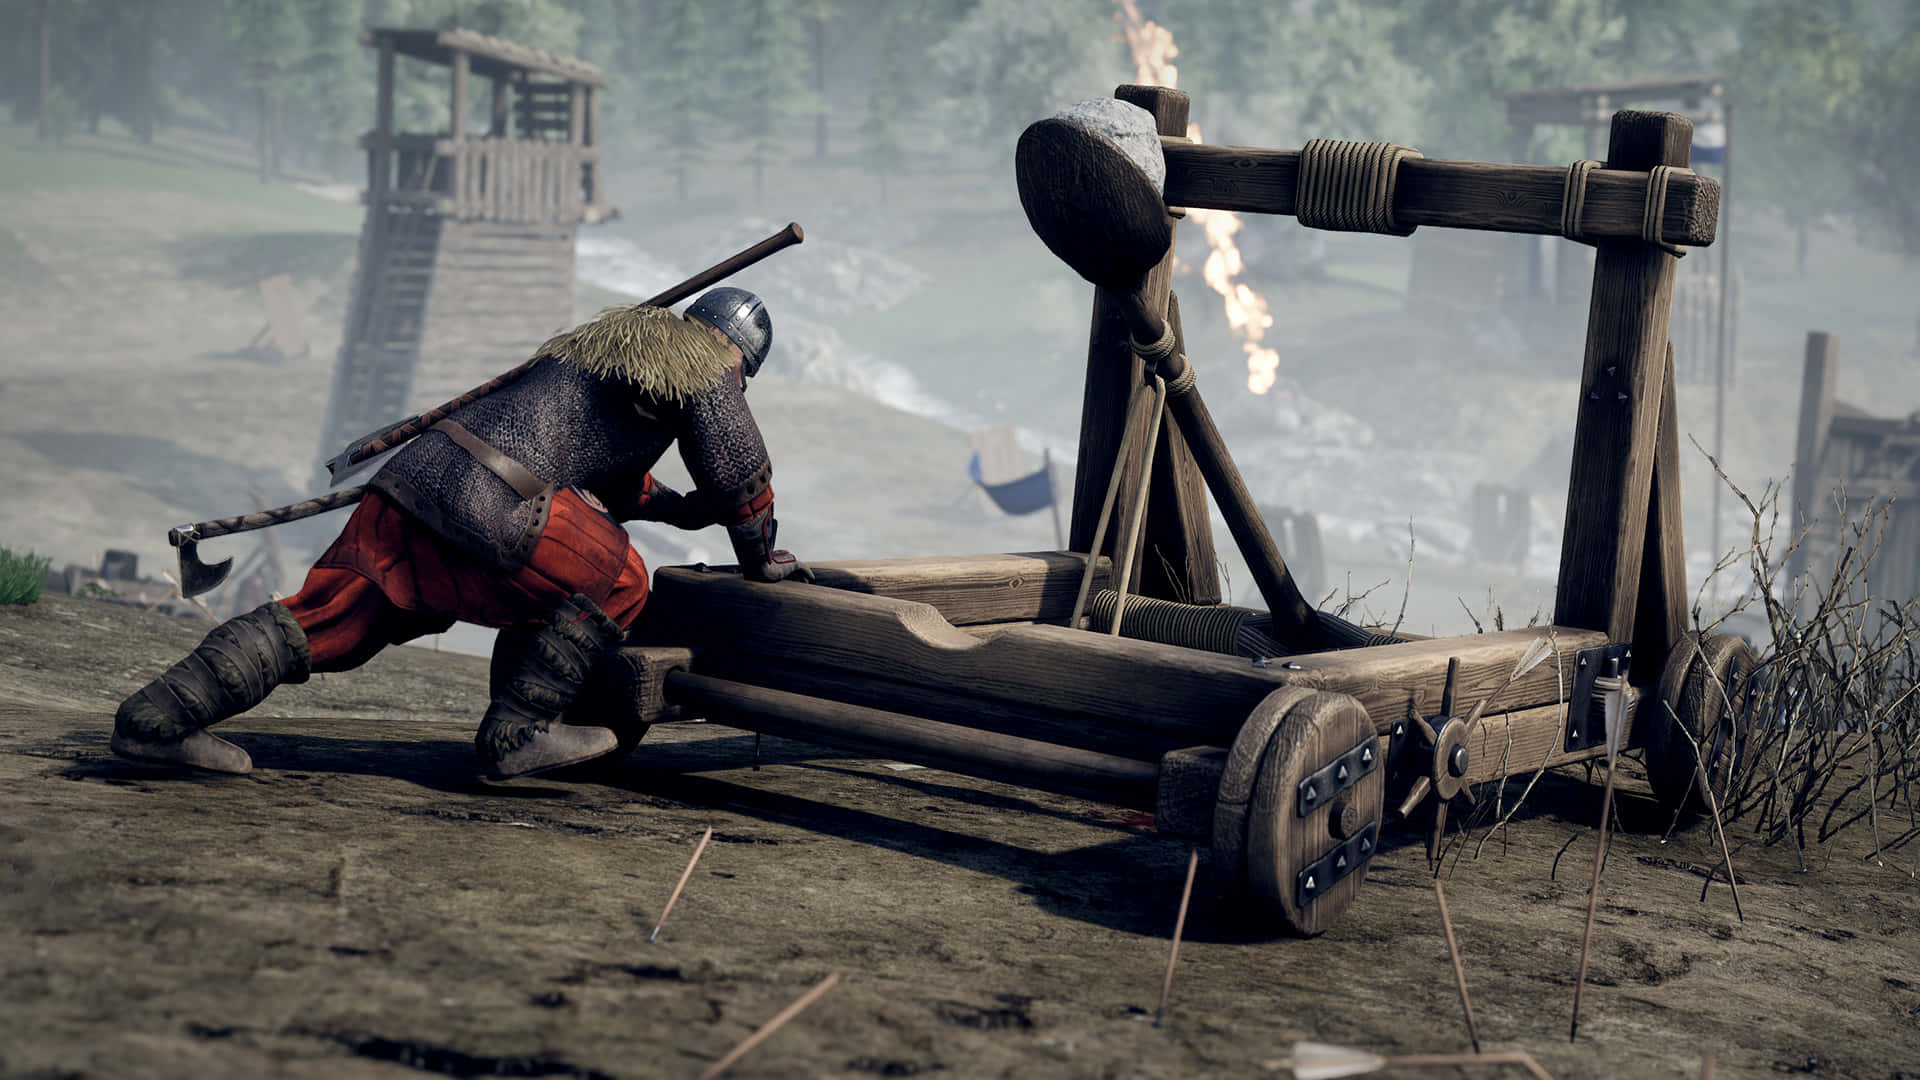 Best Mordhau Background Fixing A Catapult